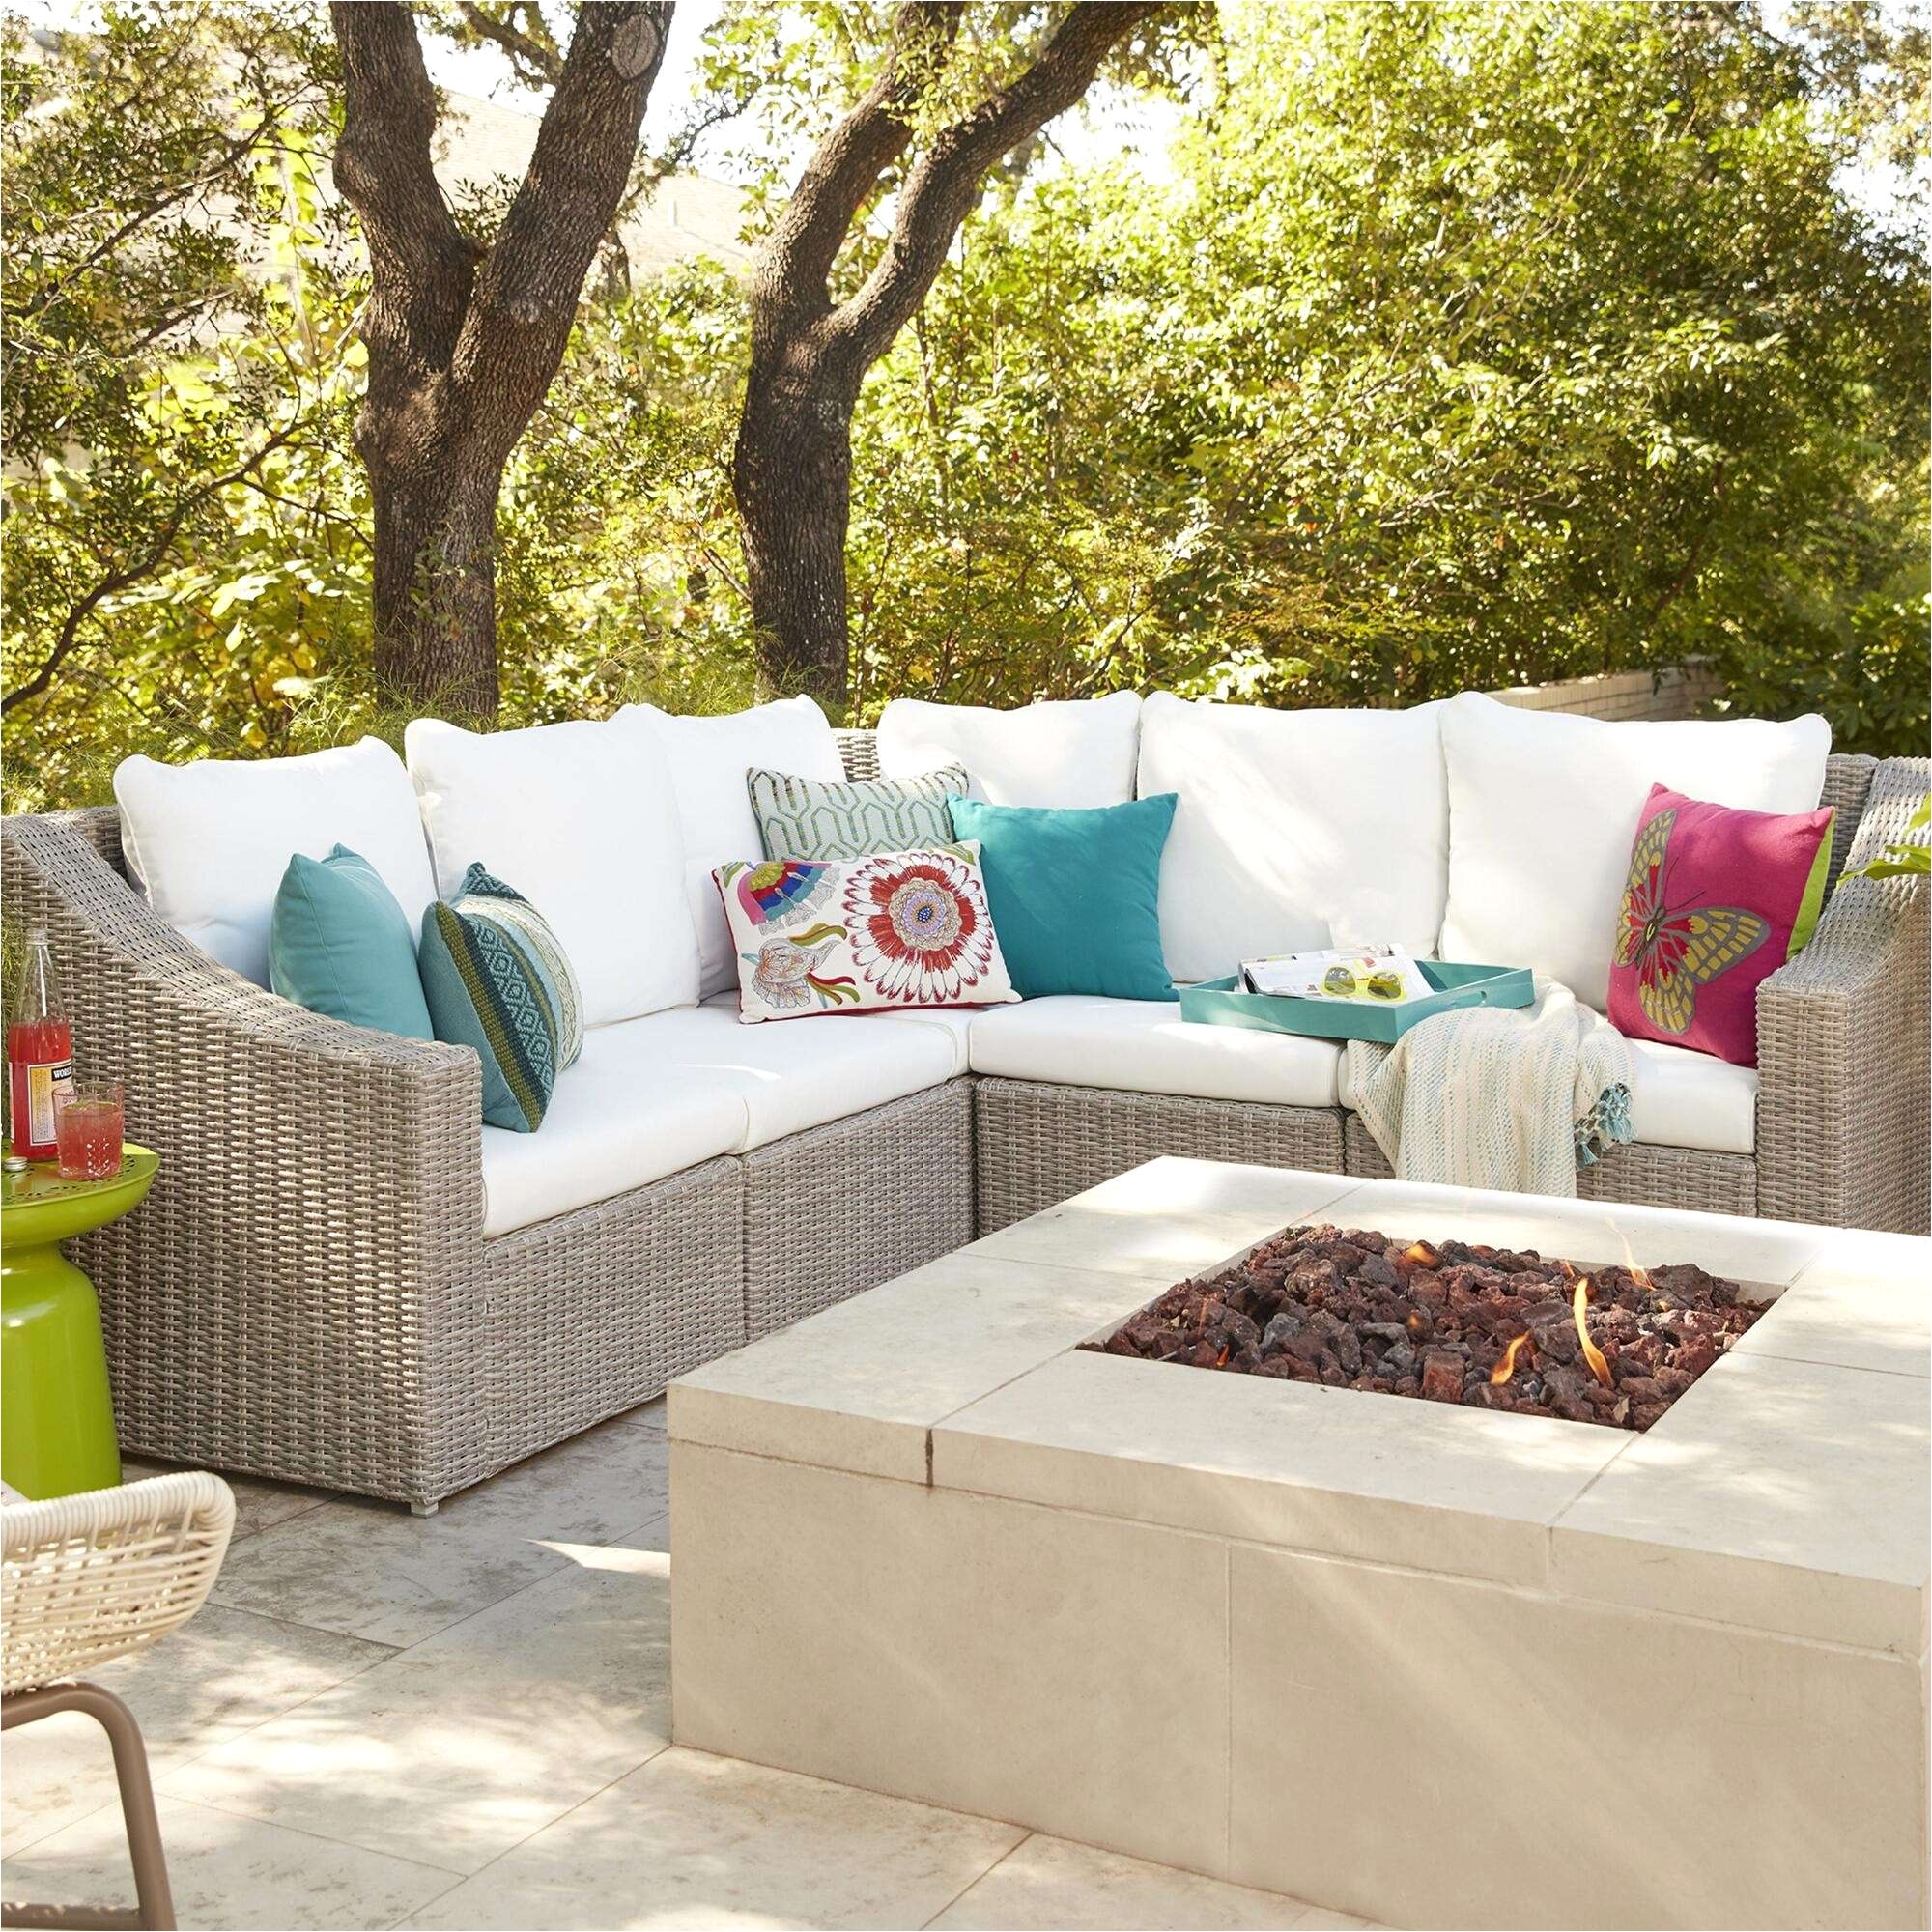 patio sectional furniture unique wicker outdoor sofa 0d patio chairs scheme of how to decorate a